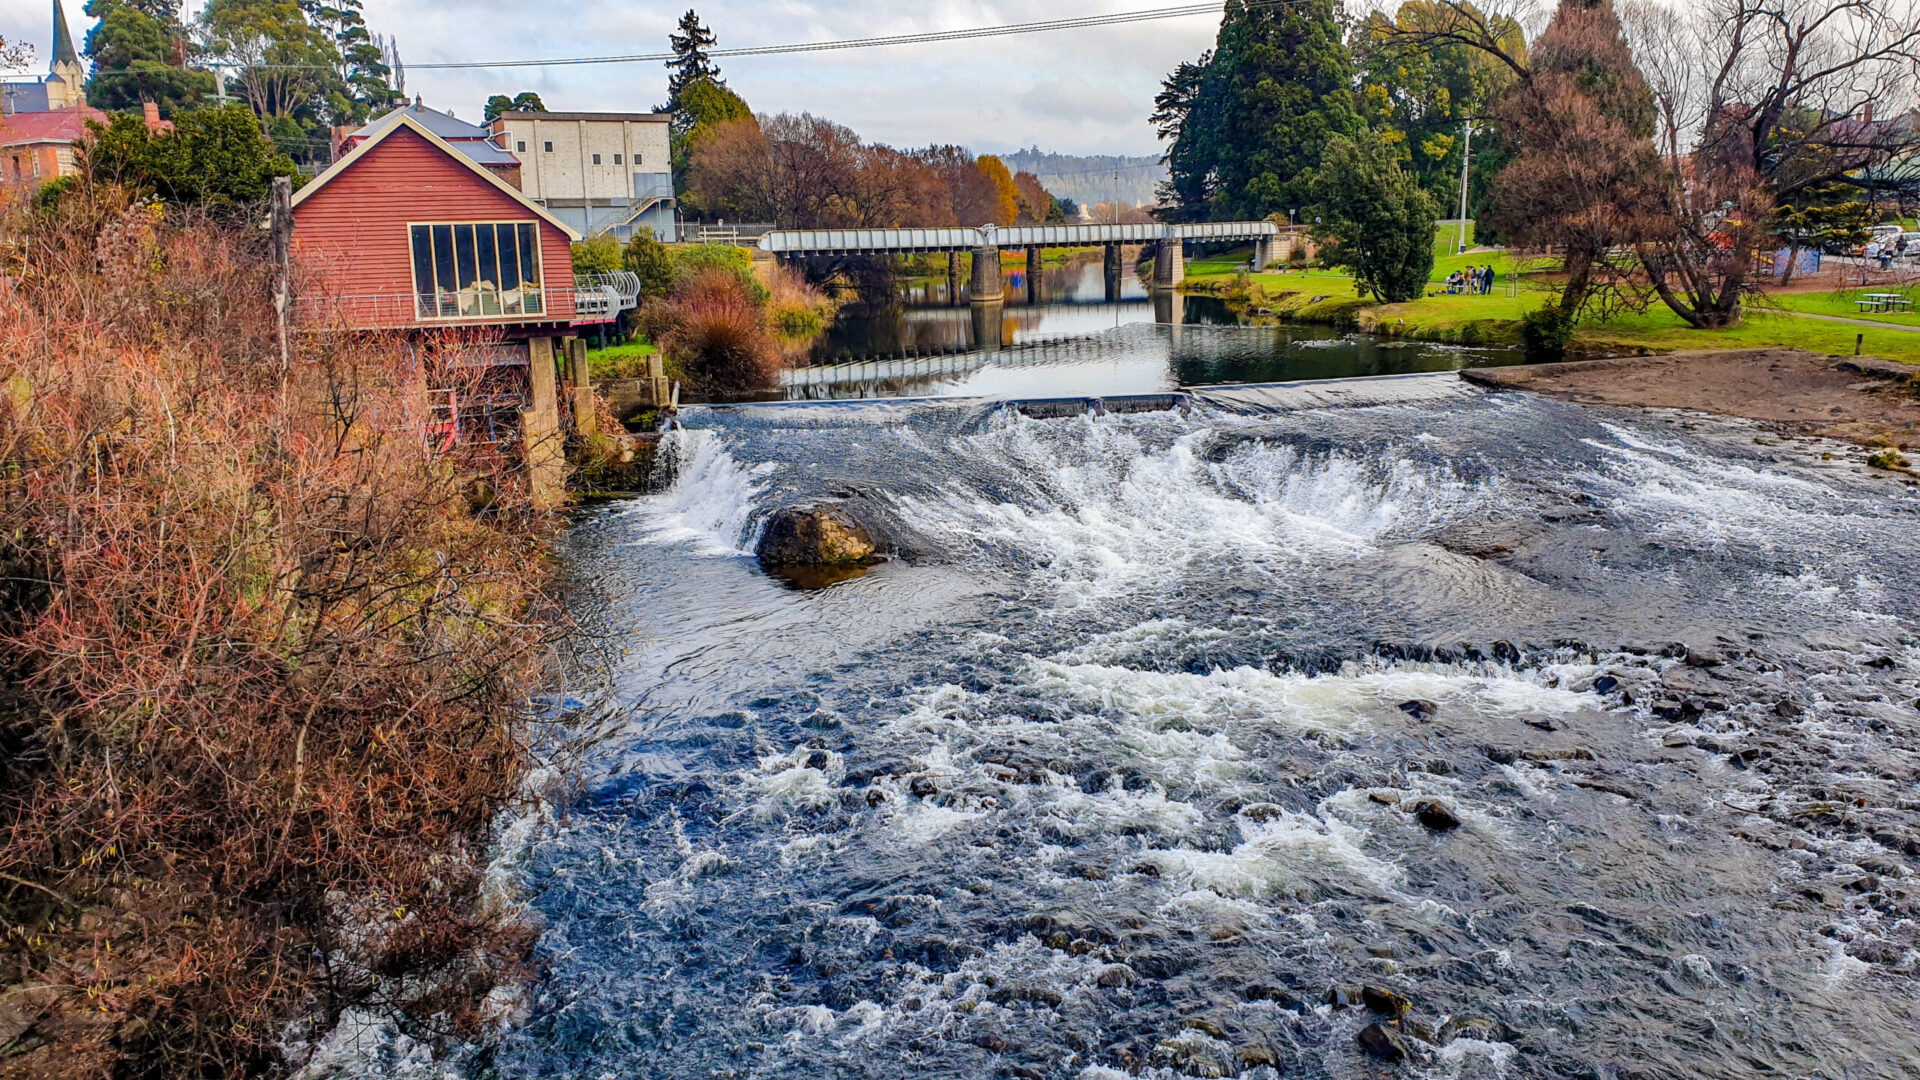 The weir along meander river in Deloraine